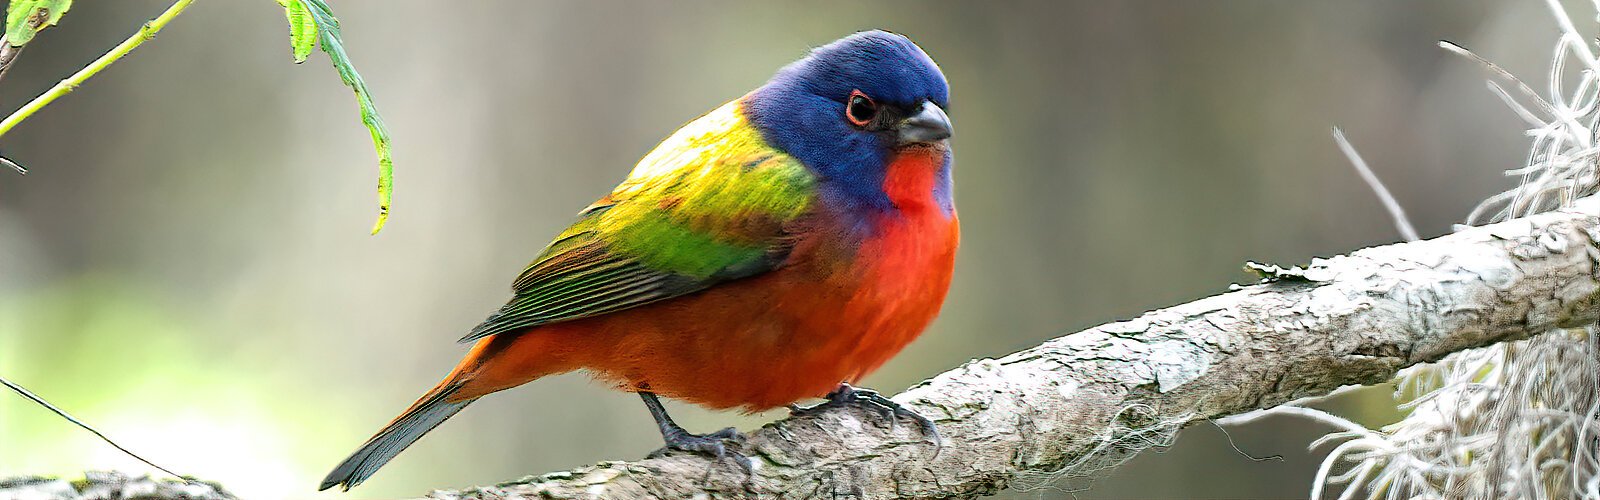 One migratory bird that favors Circle B in winter is the colorful painted bunting, a highly sought-after prize for photographers. This one is a male, as females are just of one color, yellowish-green.